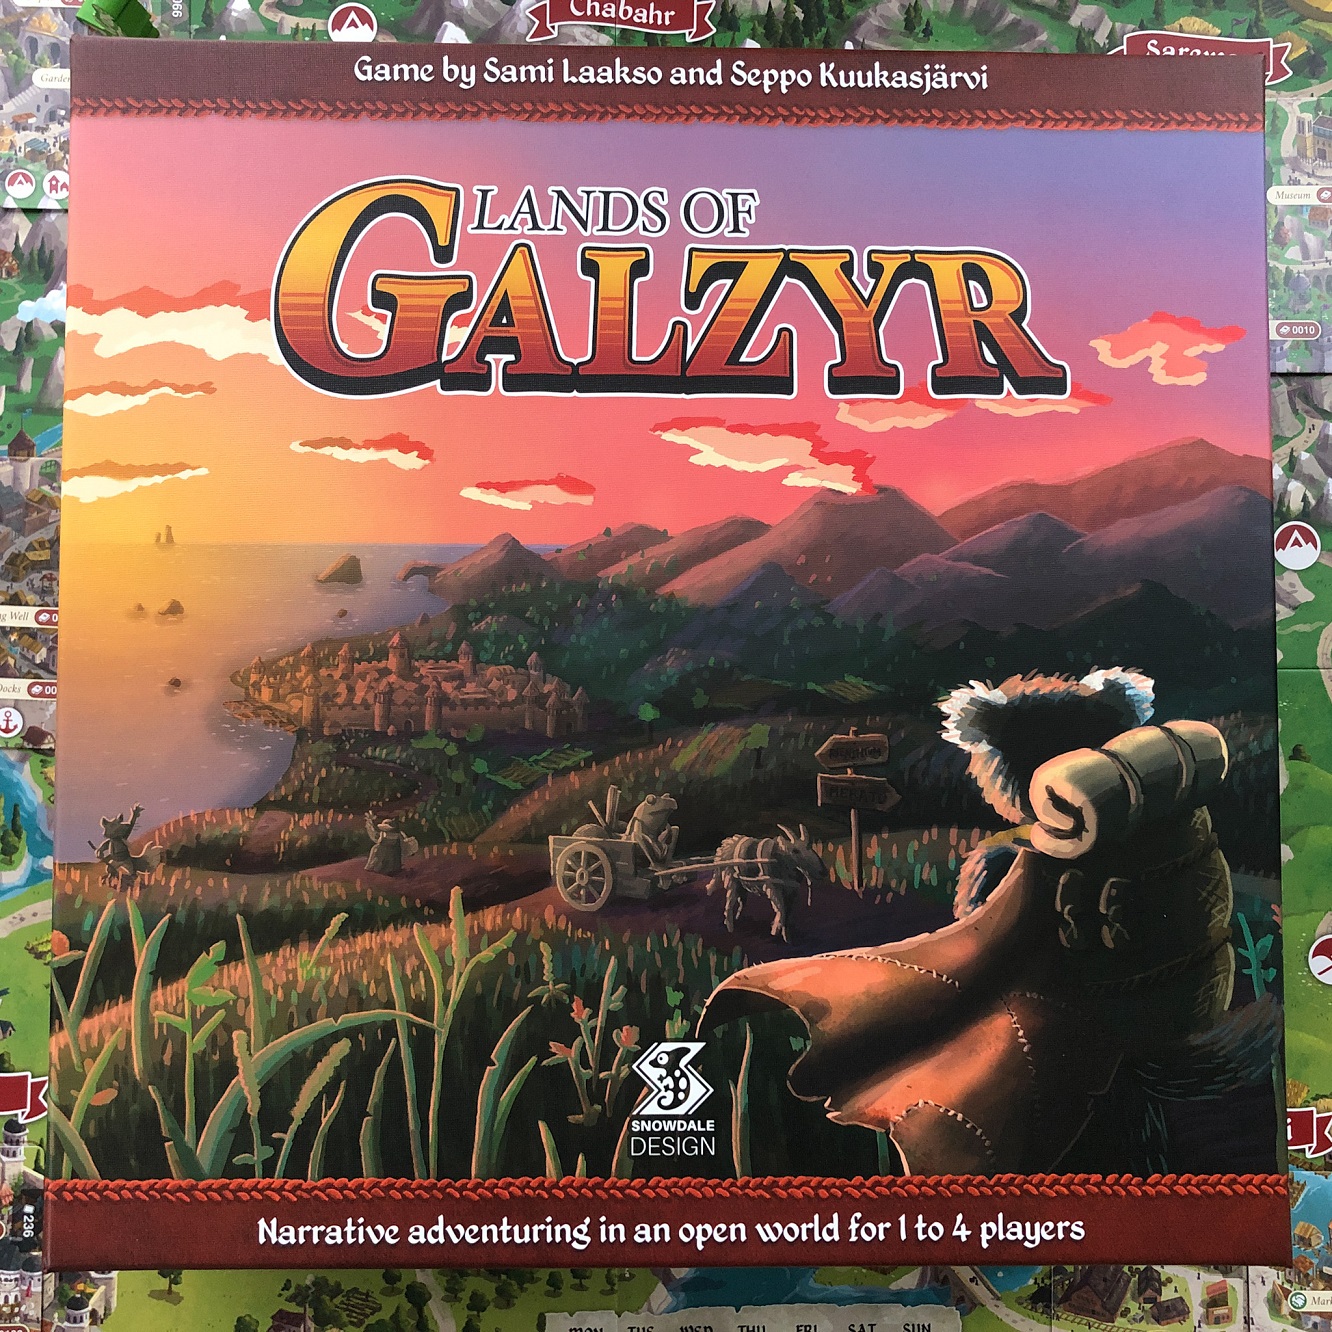 Lands of Galzyr: Game of the Year 2022